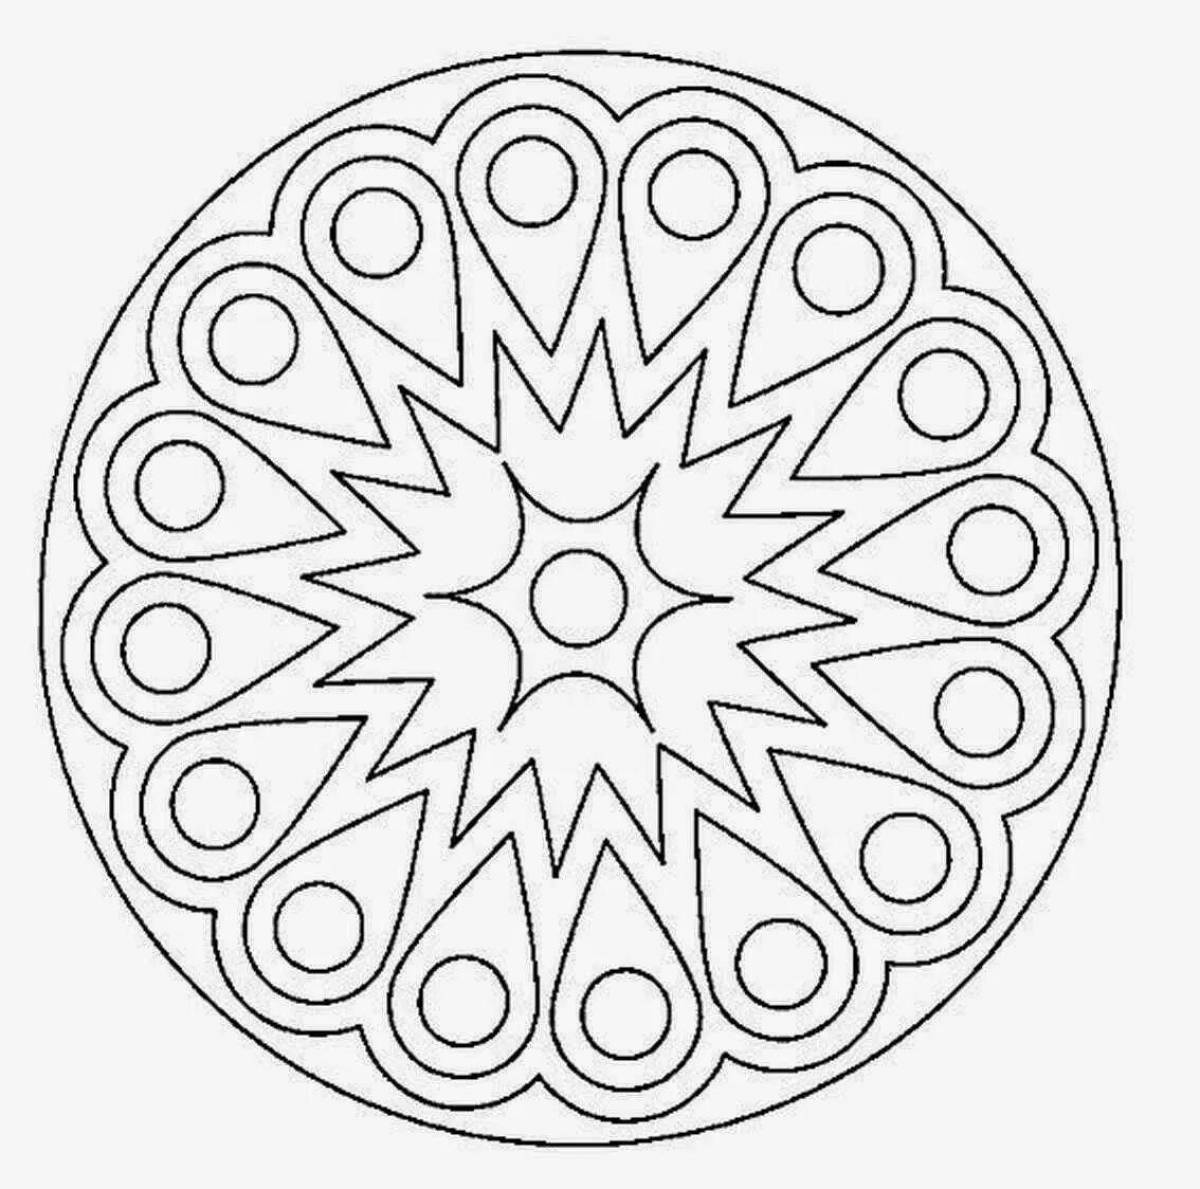 Coloring page with gentle circular pattern